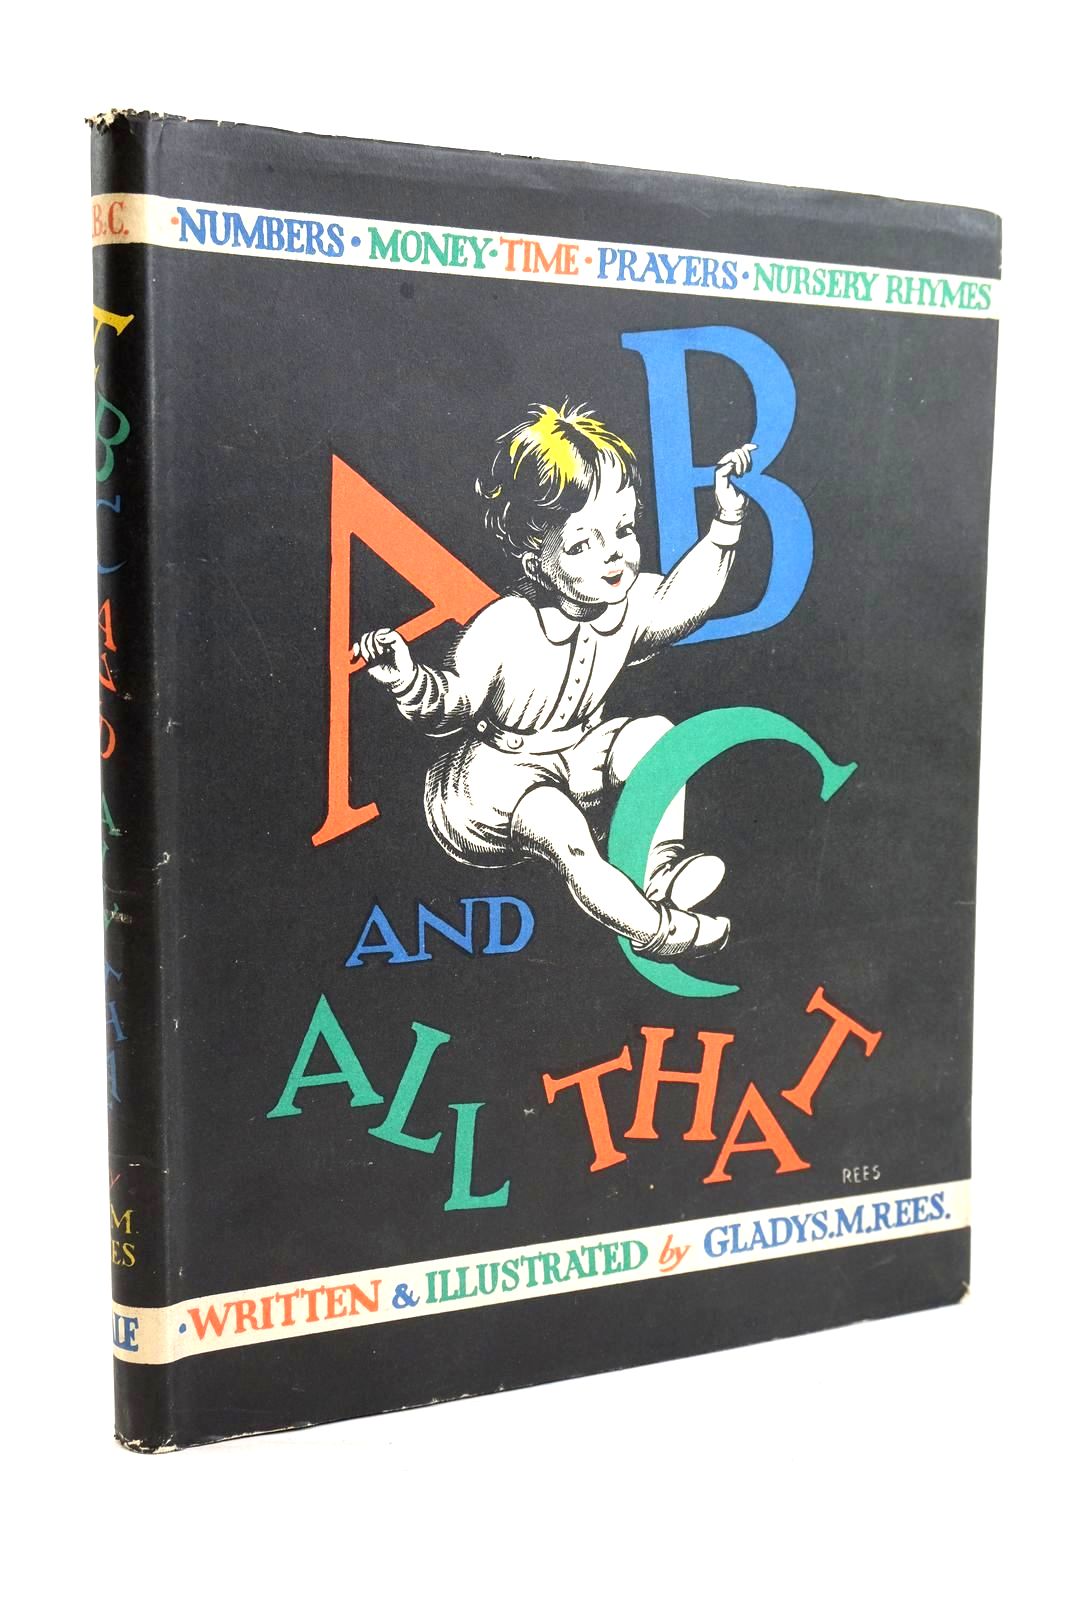 Photo of ABC AND ALL THAT written by Rees, Gladys M. illustrated by Rees, Gladys M. published by Robert Hale Limited (STOCK CODE: 1319692)  for sale by Stella & Rose's Books